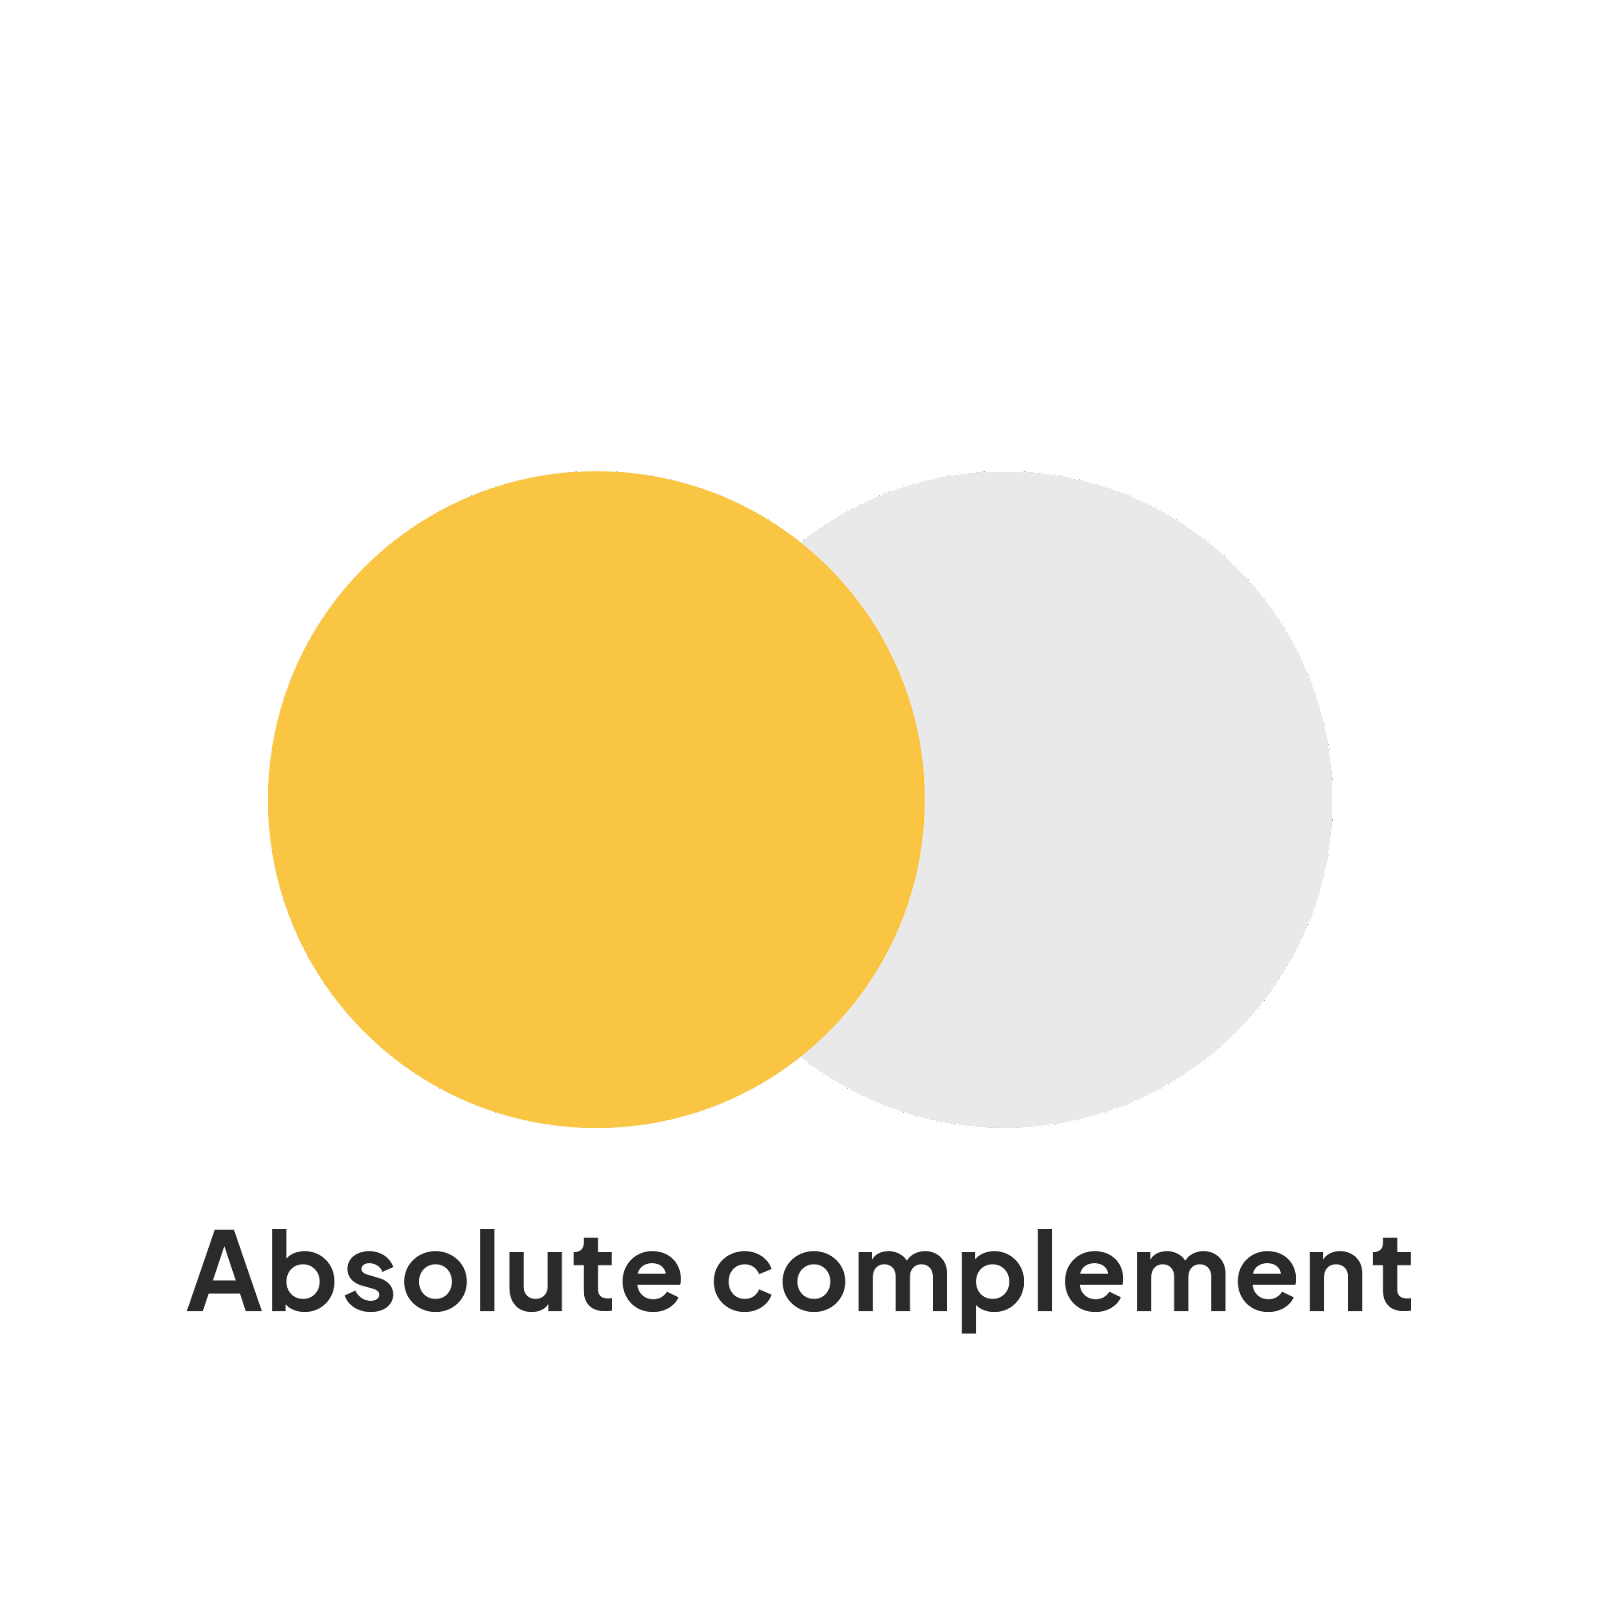 Absolute complement